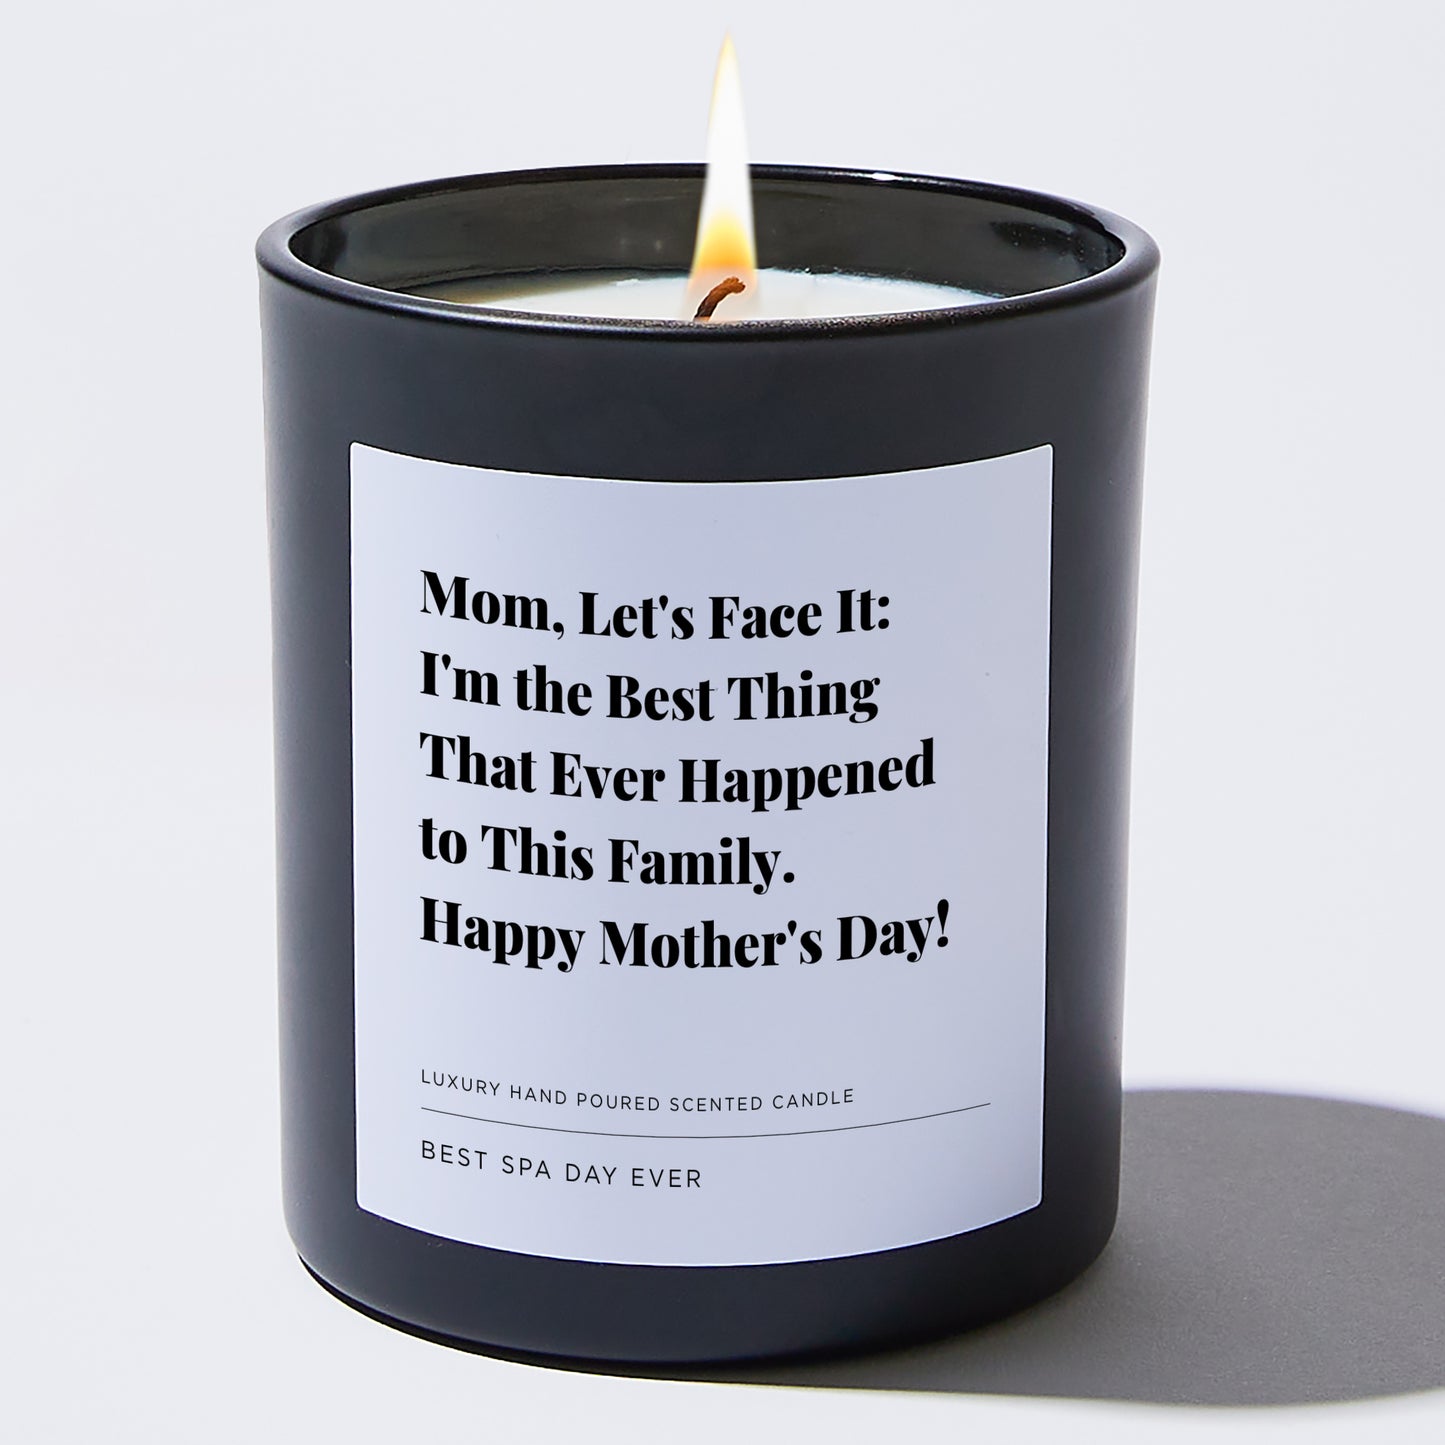 Gift for Mom - Mom, let's face it: I'm the best thing that ever happened to this family. Happy Mother's Day! - Candle